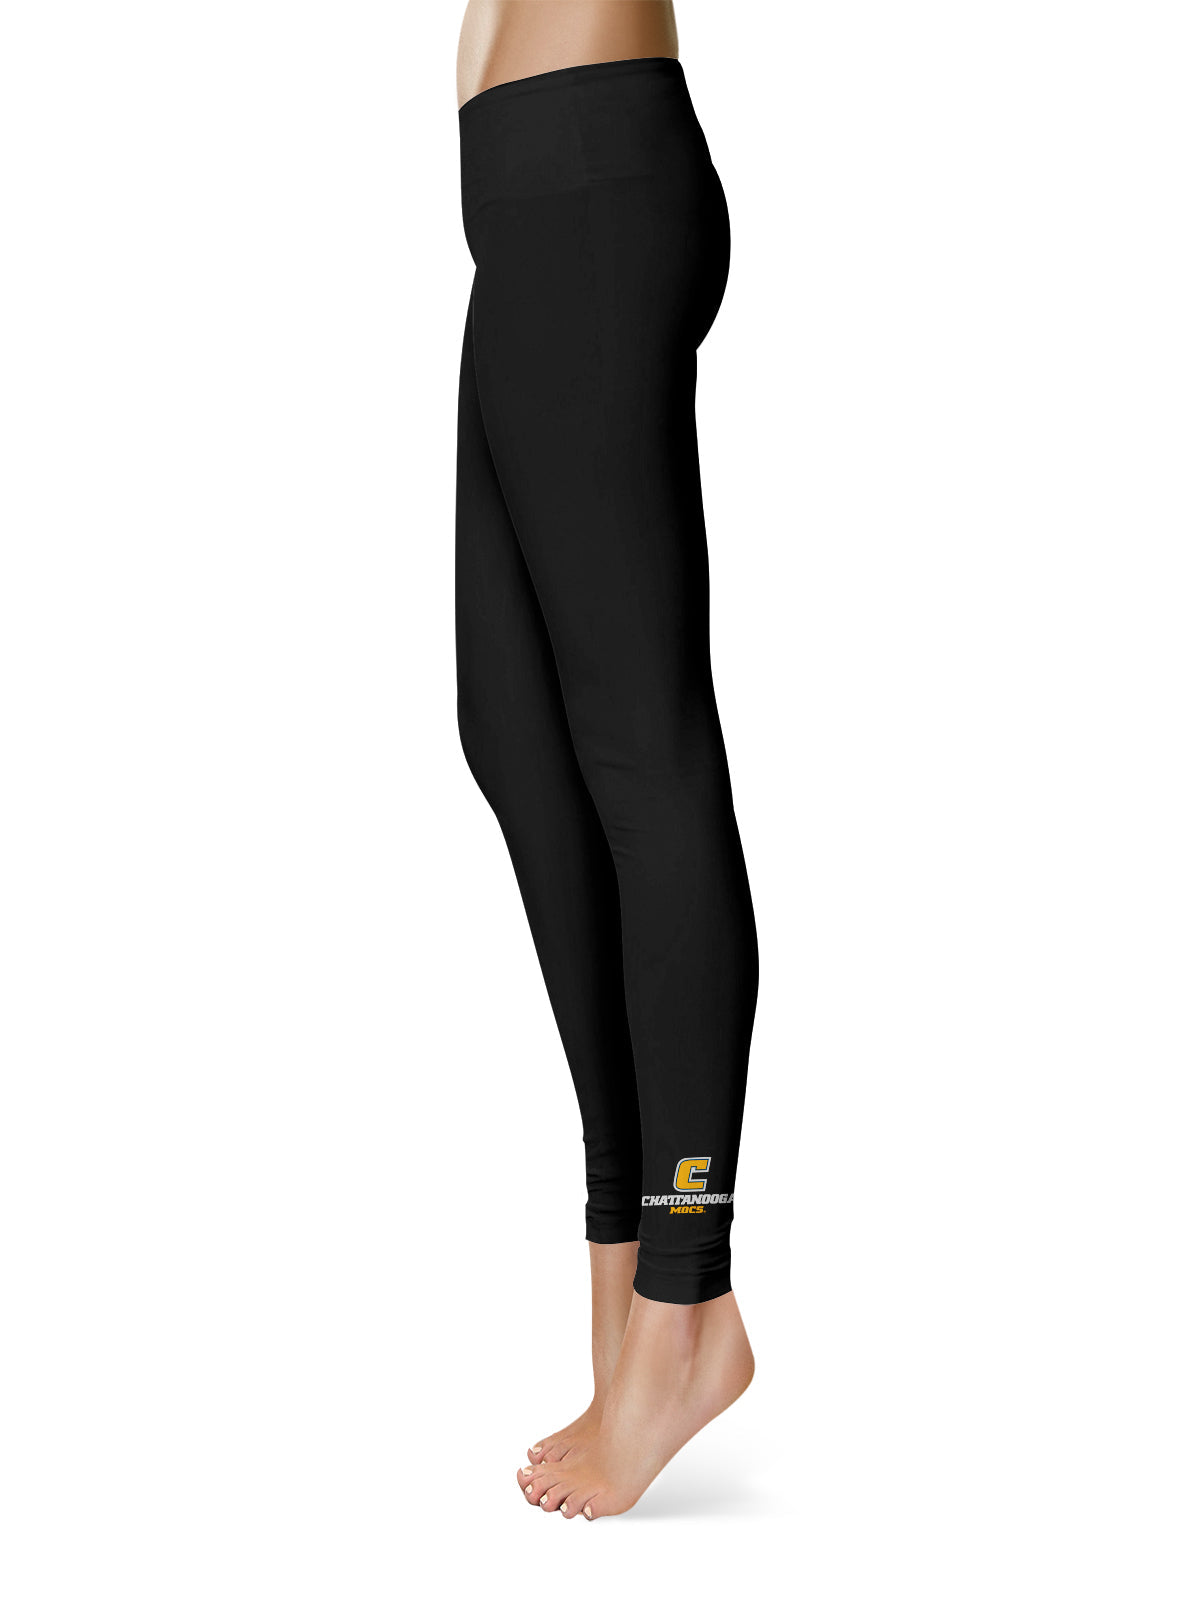 Tennessee Chattanooga Mocs Vive La Fete Game Day Collegiate Logo at Ankle Women Black Yoga Leggings 2.5 Waist Tights